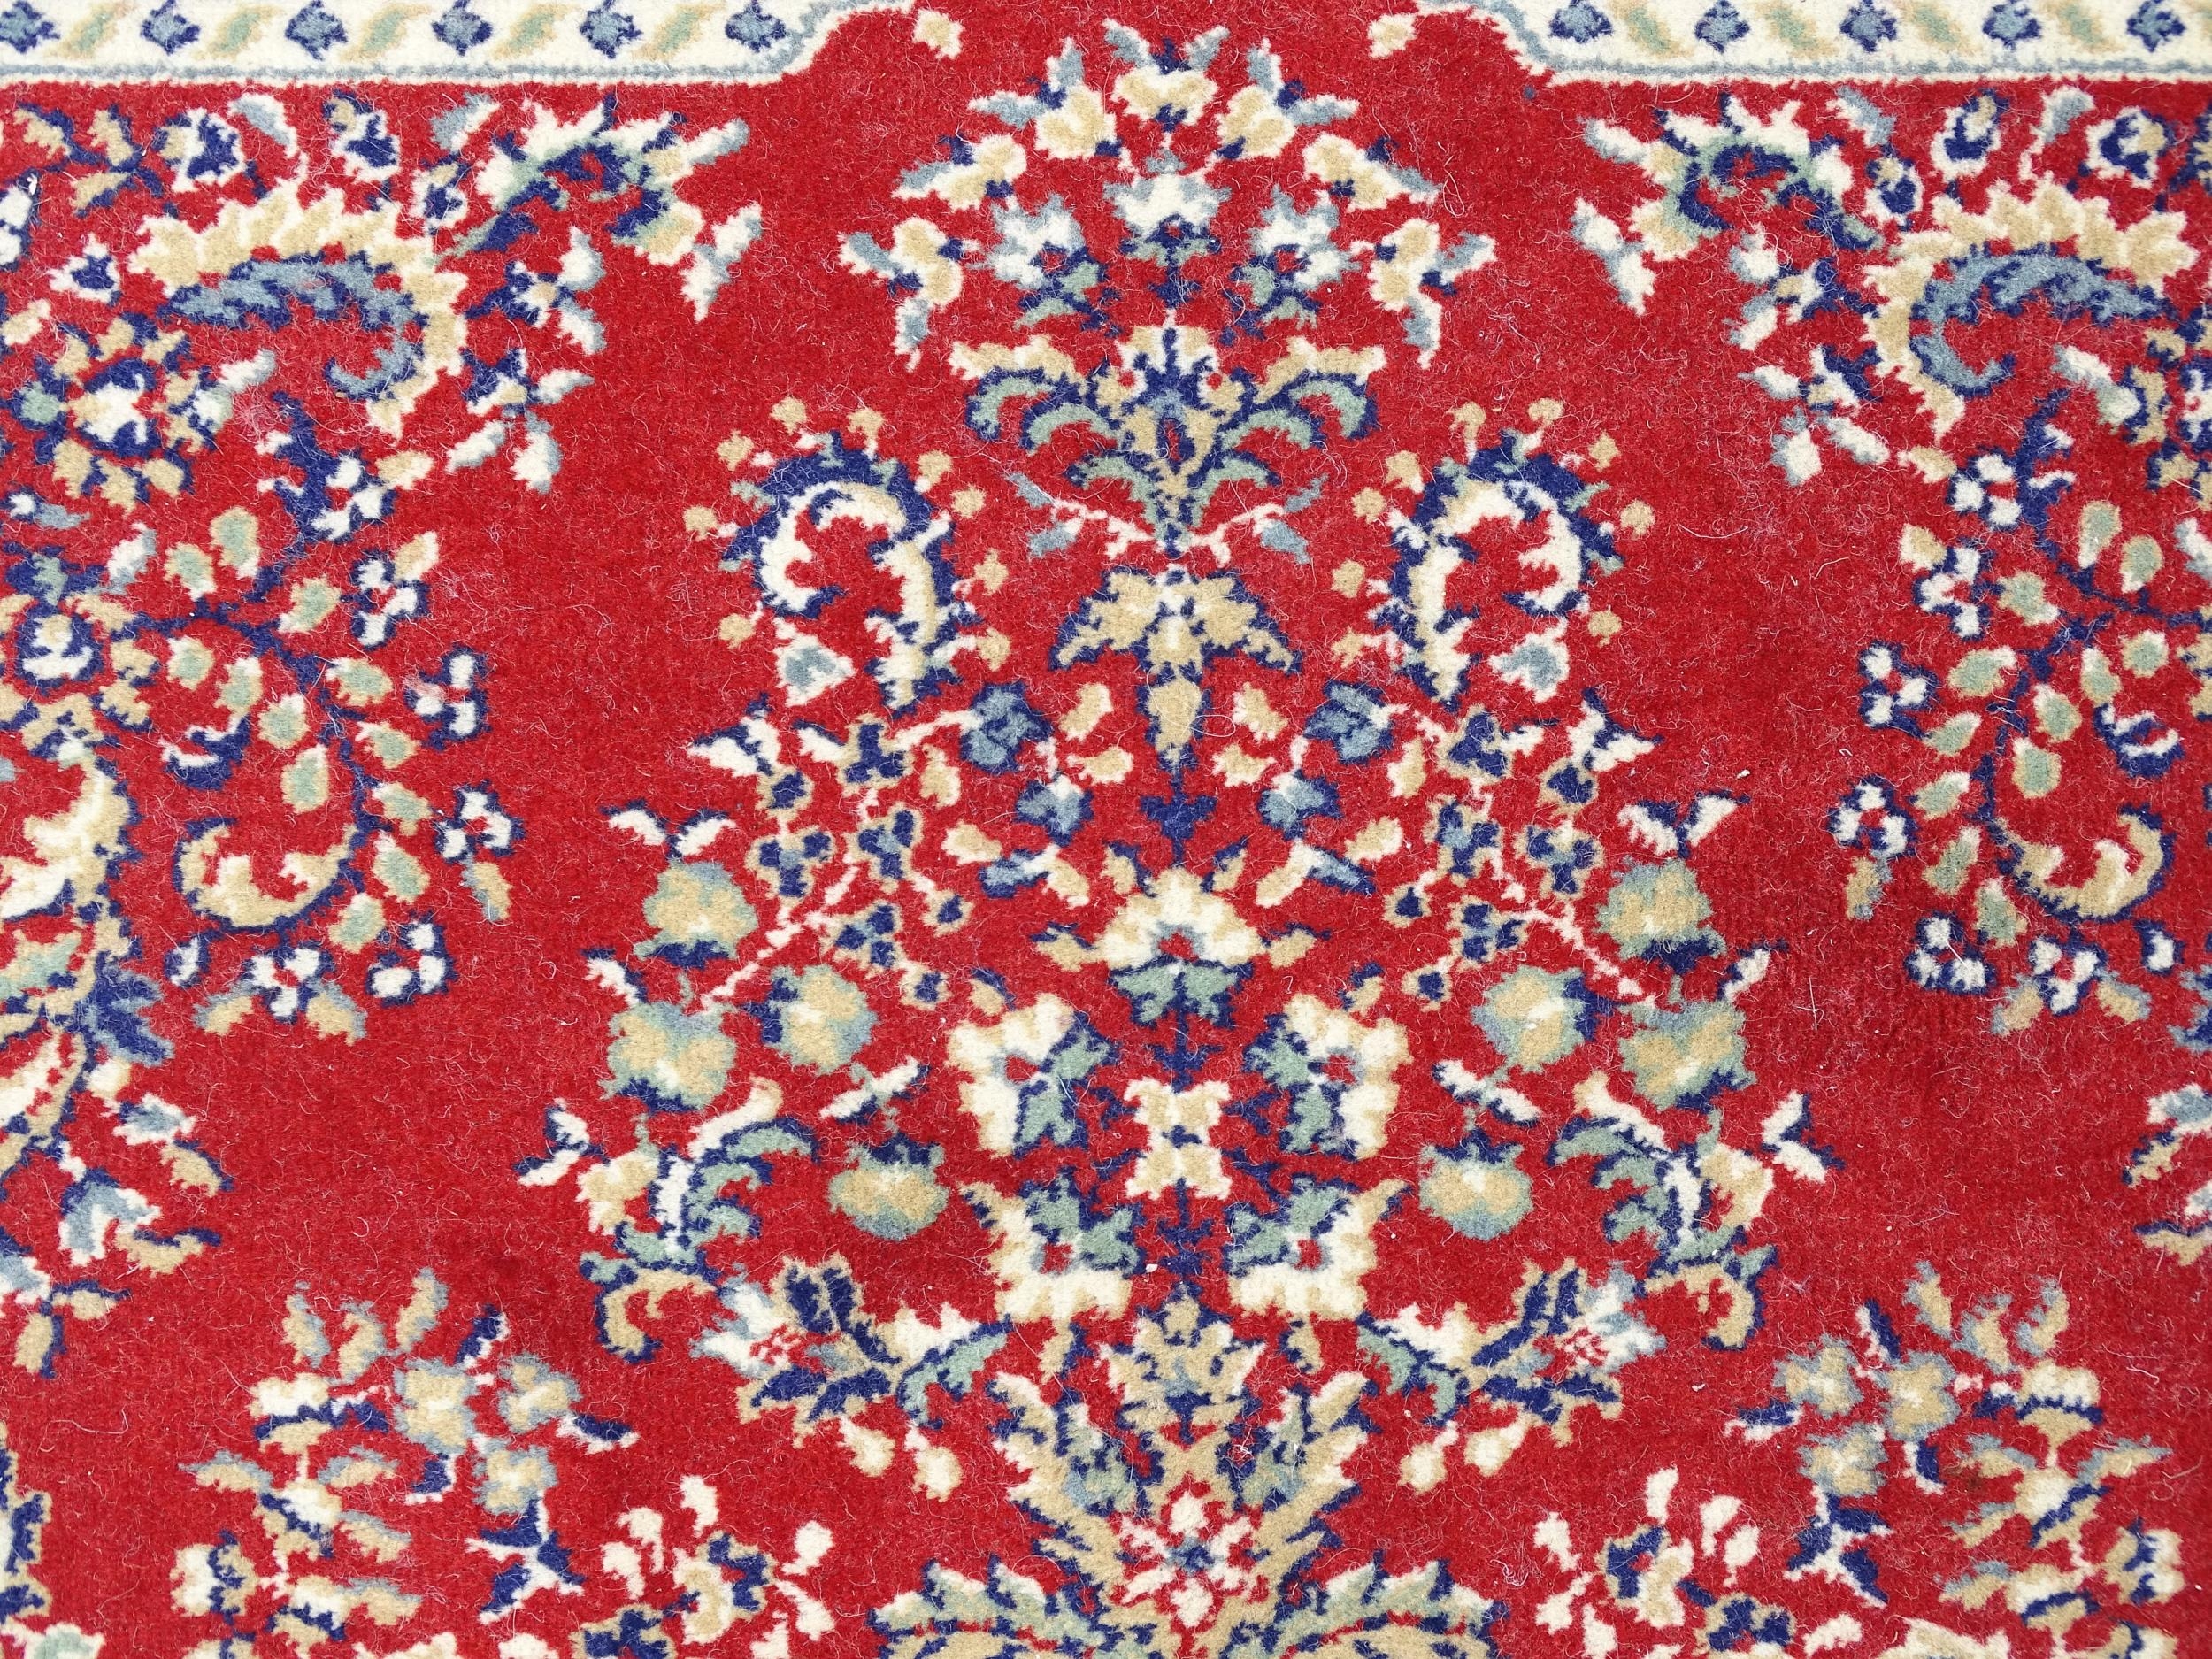 Carpet / Rug : A red ground rug with central cream and blue vignette, decorated with floral and - Image 4 of 6